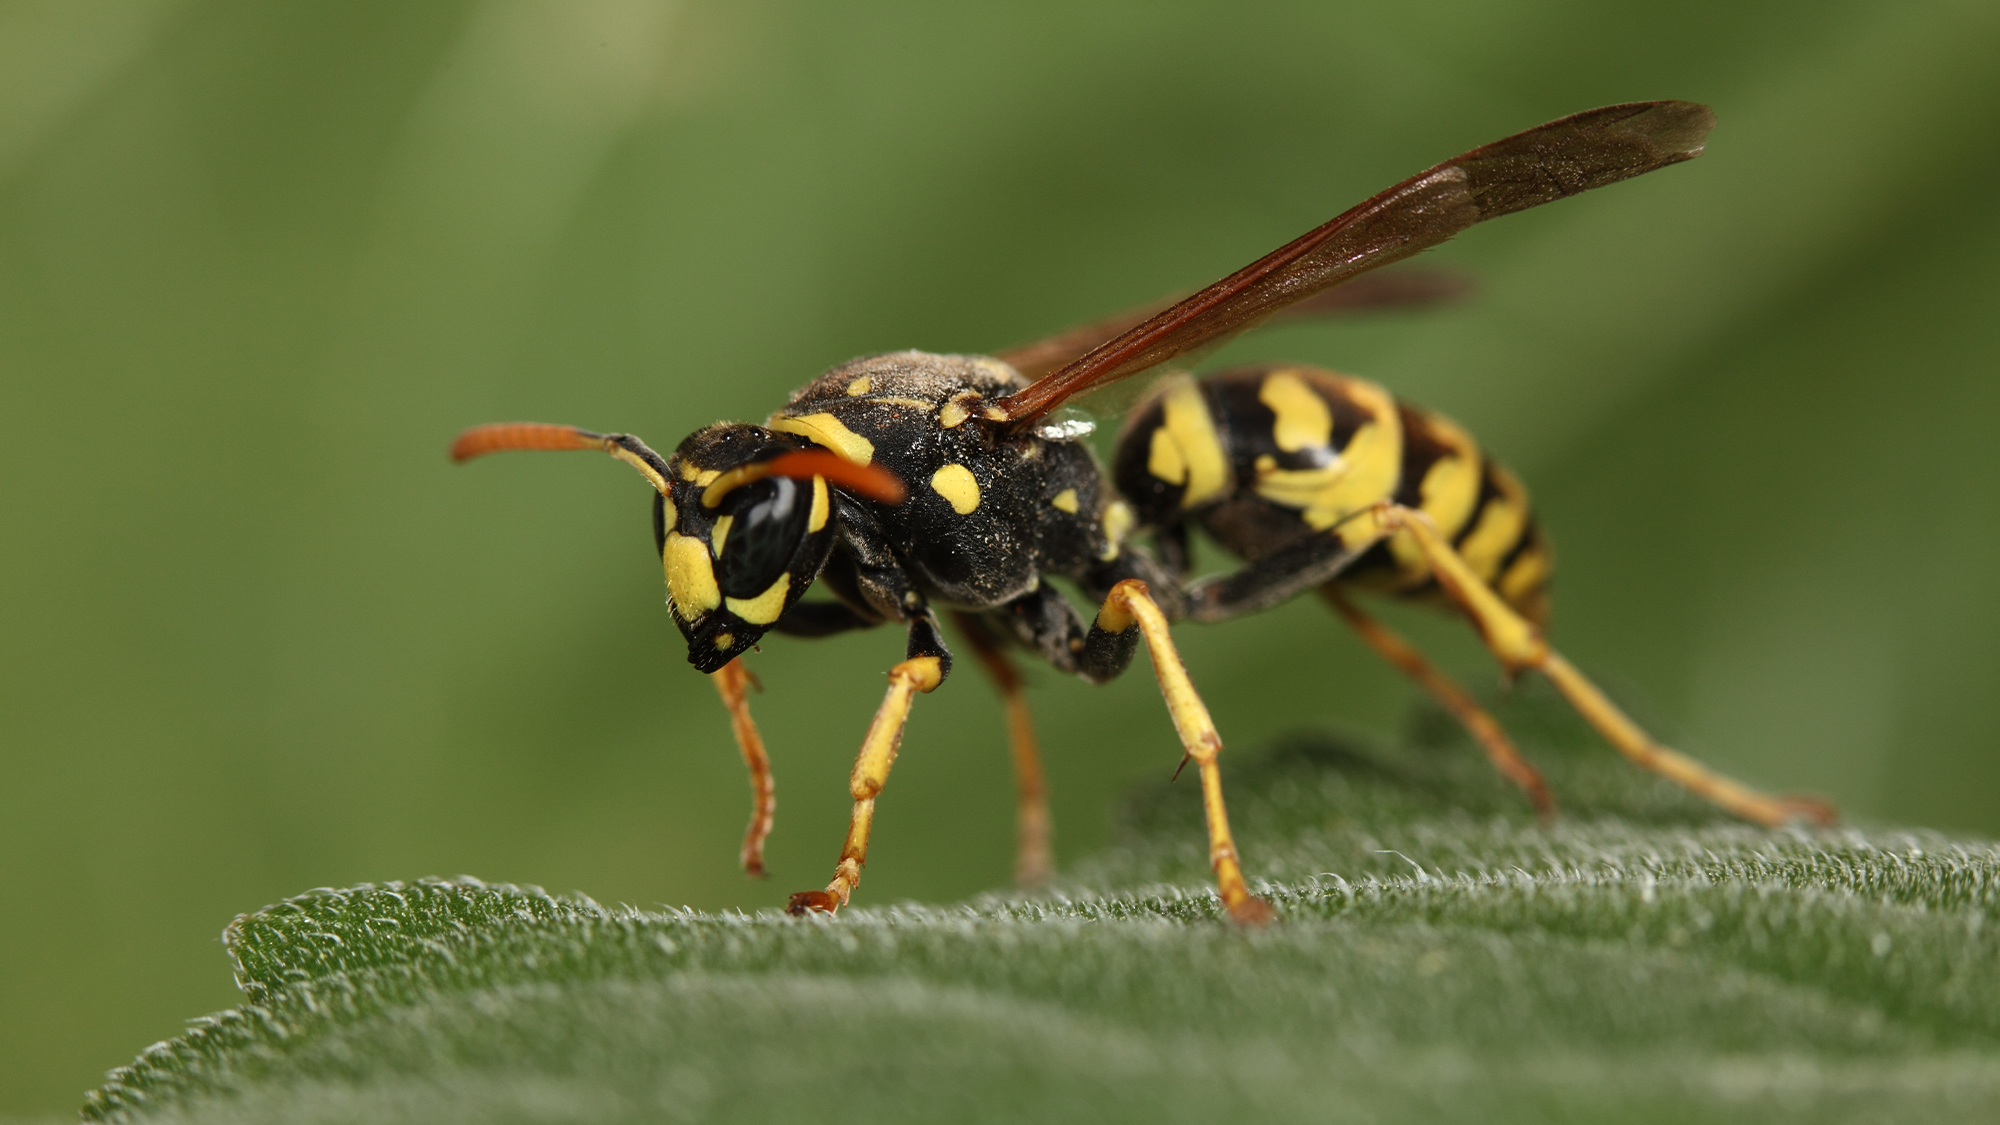 Male wasps use their genital spines to sting frogs (and people)